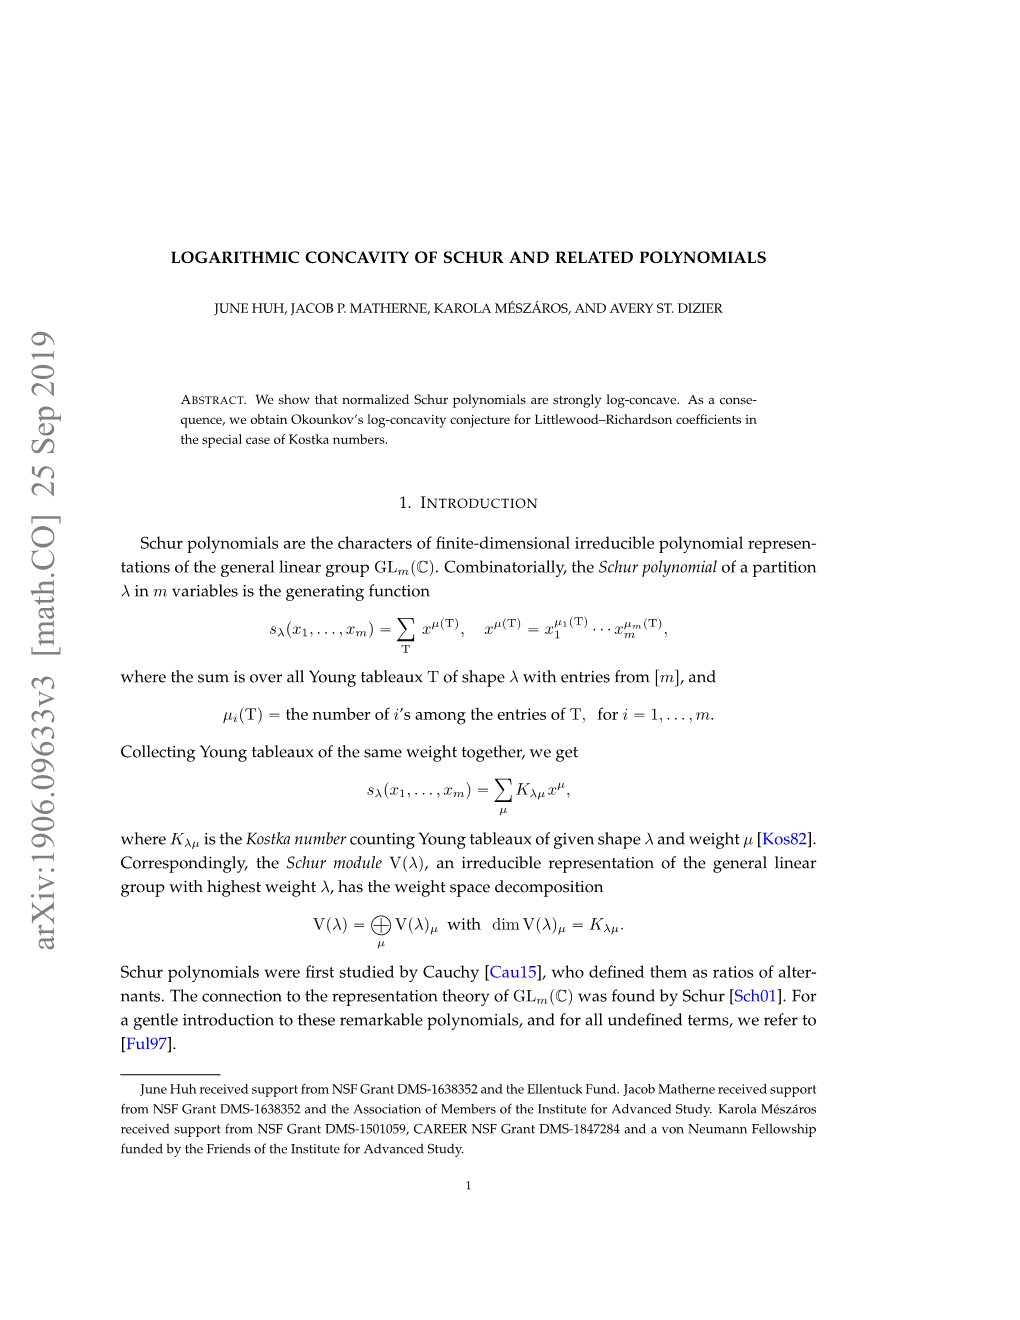 Logarithmic Concavity of Schur and Related Polynomials